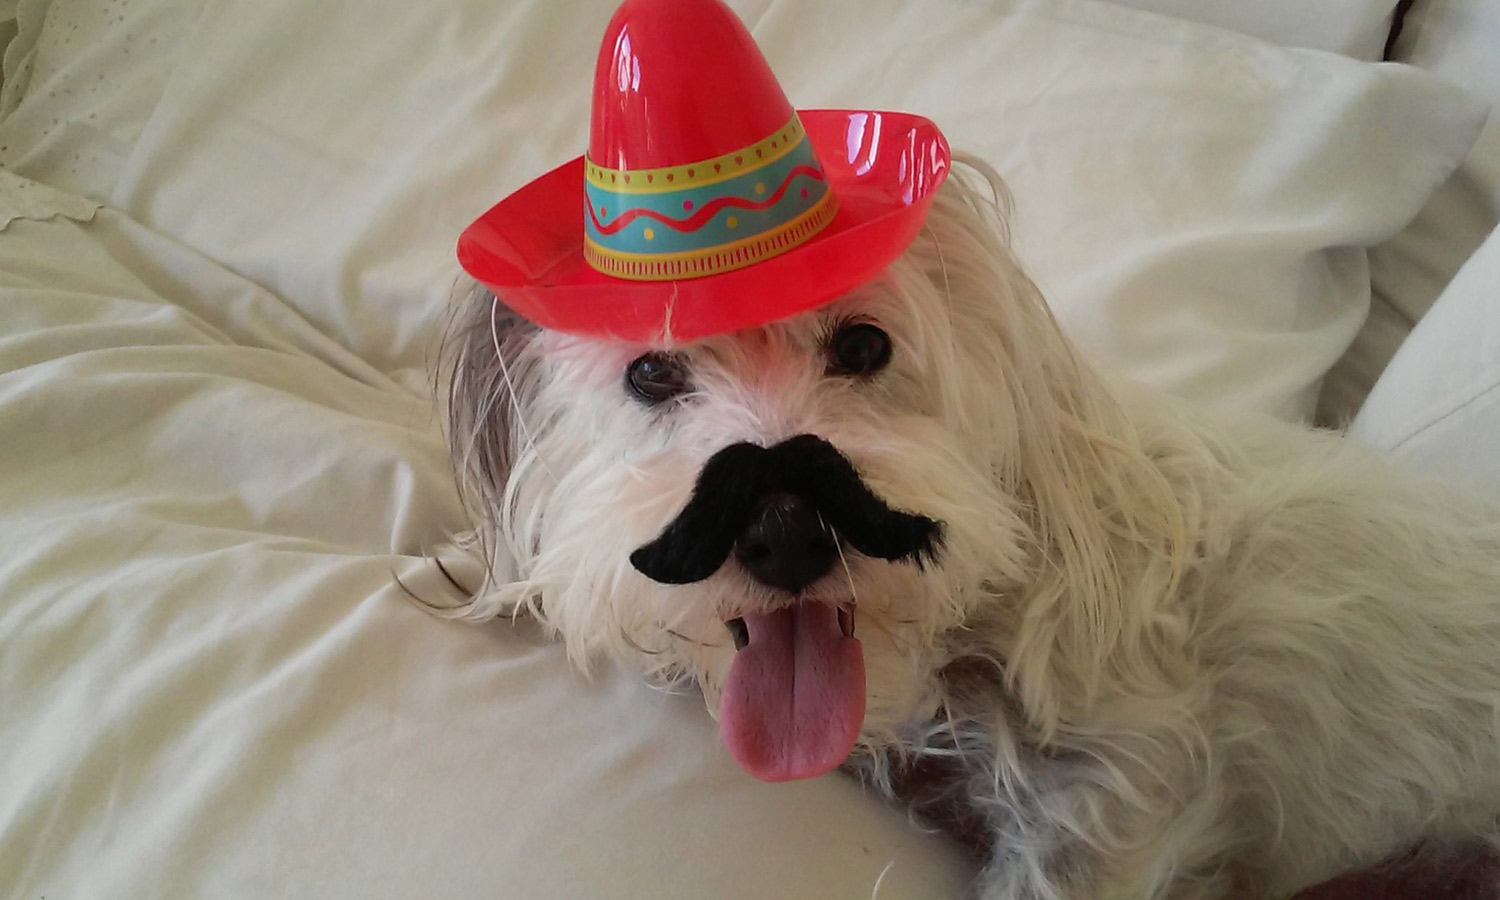 Meet Fuzzy. Joanne G. emailed a picture of her little white long-haired terrier Fuzzy, all dressed up for Cinco de Mayo, complete with a sombrero!